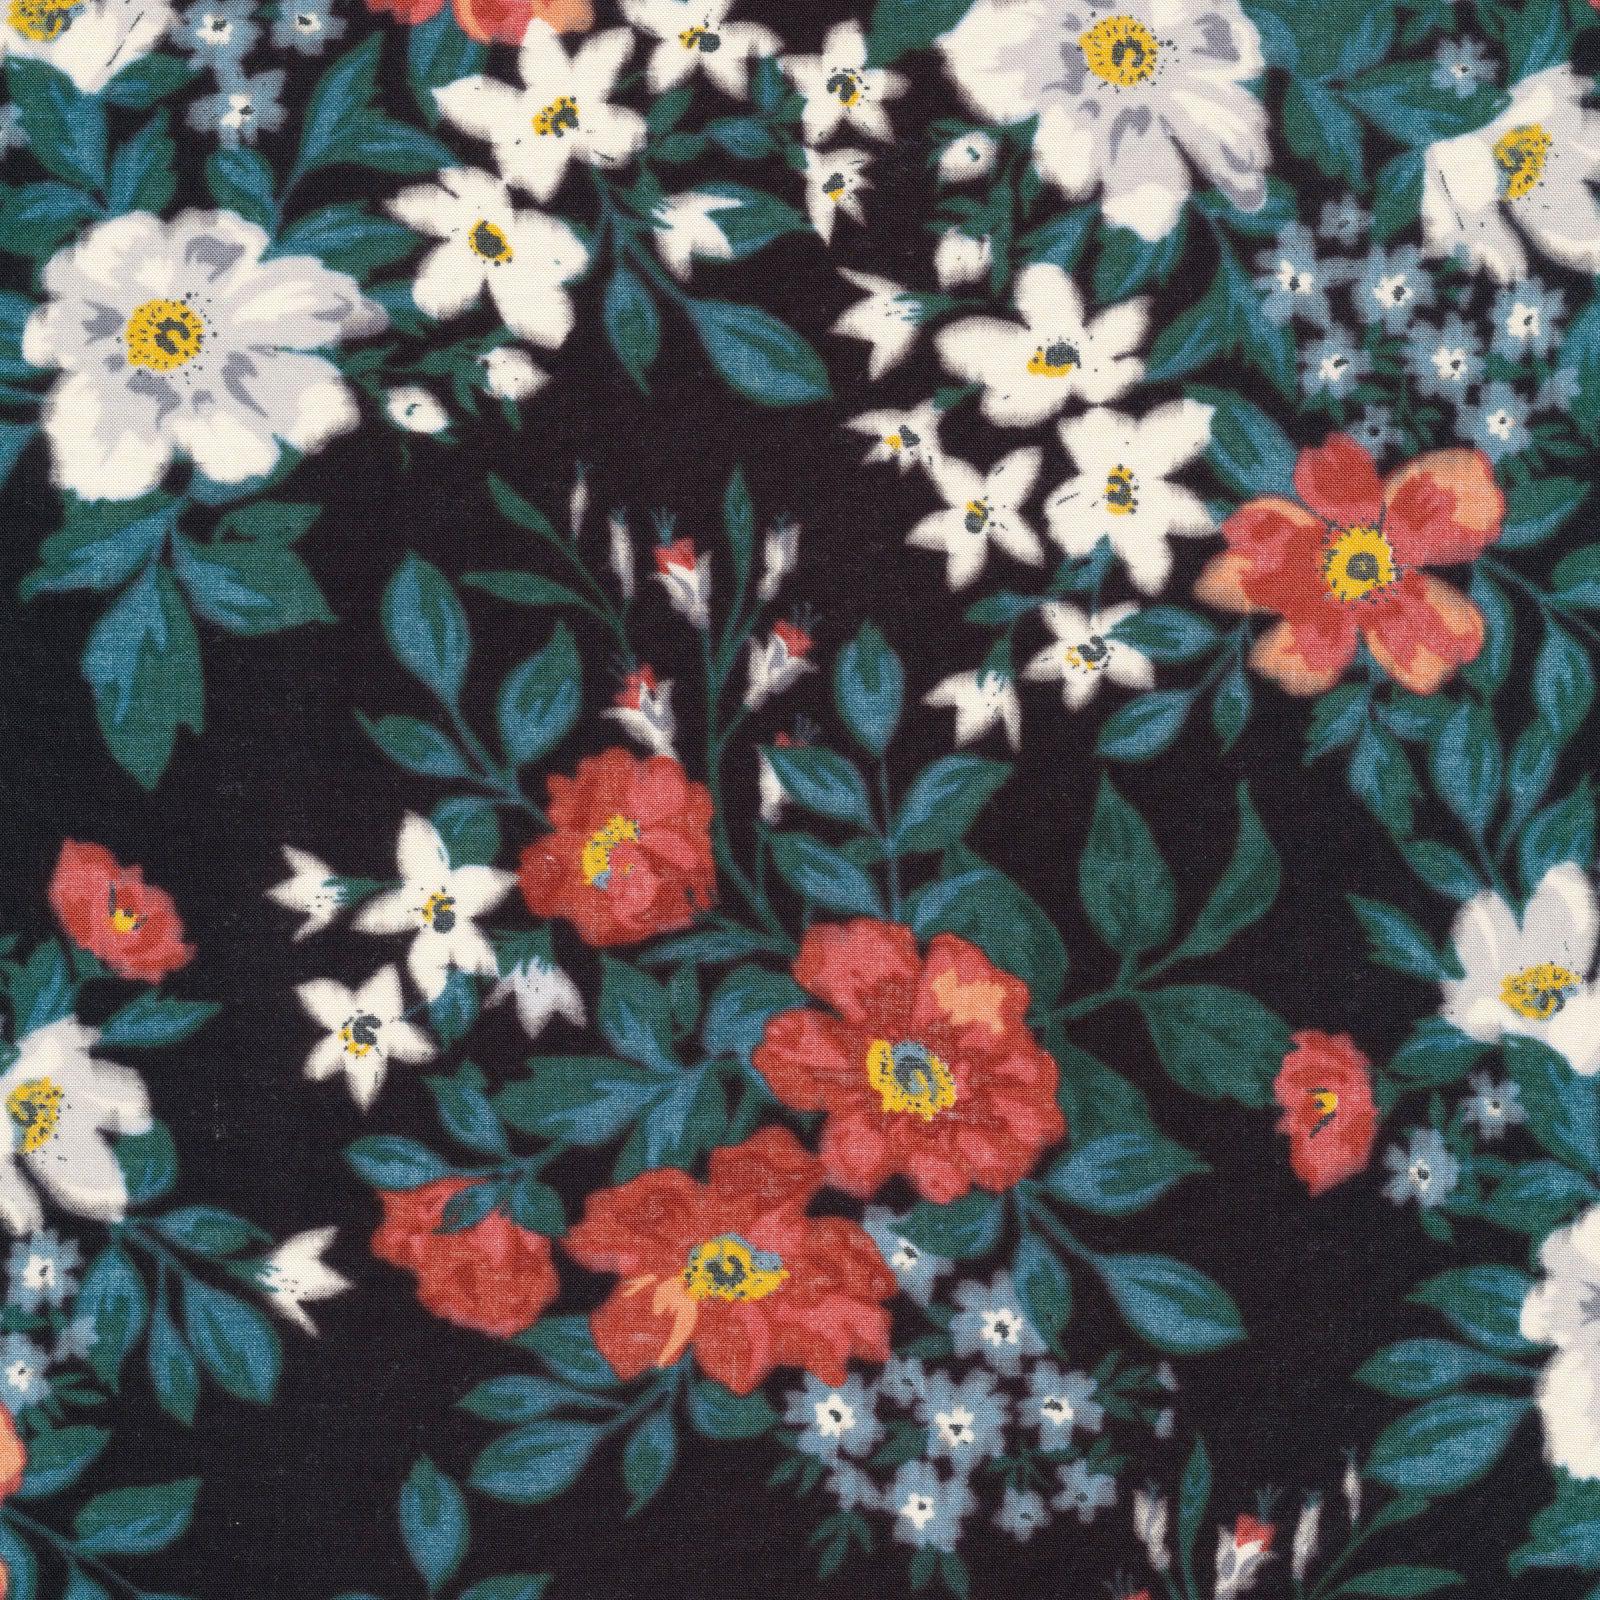 Cloud9-Sweet Briar on Rayon-fabric-gather here online